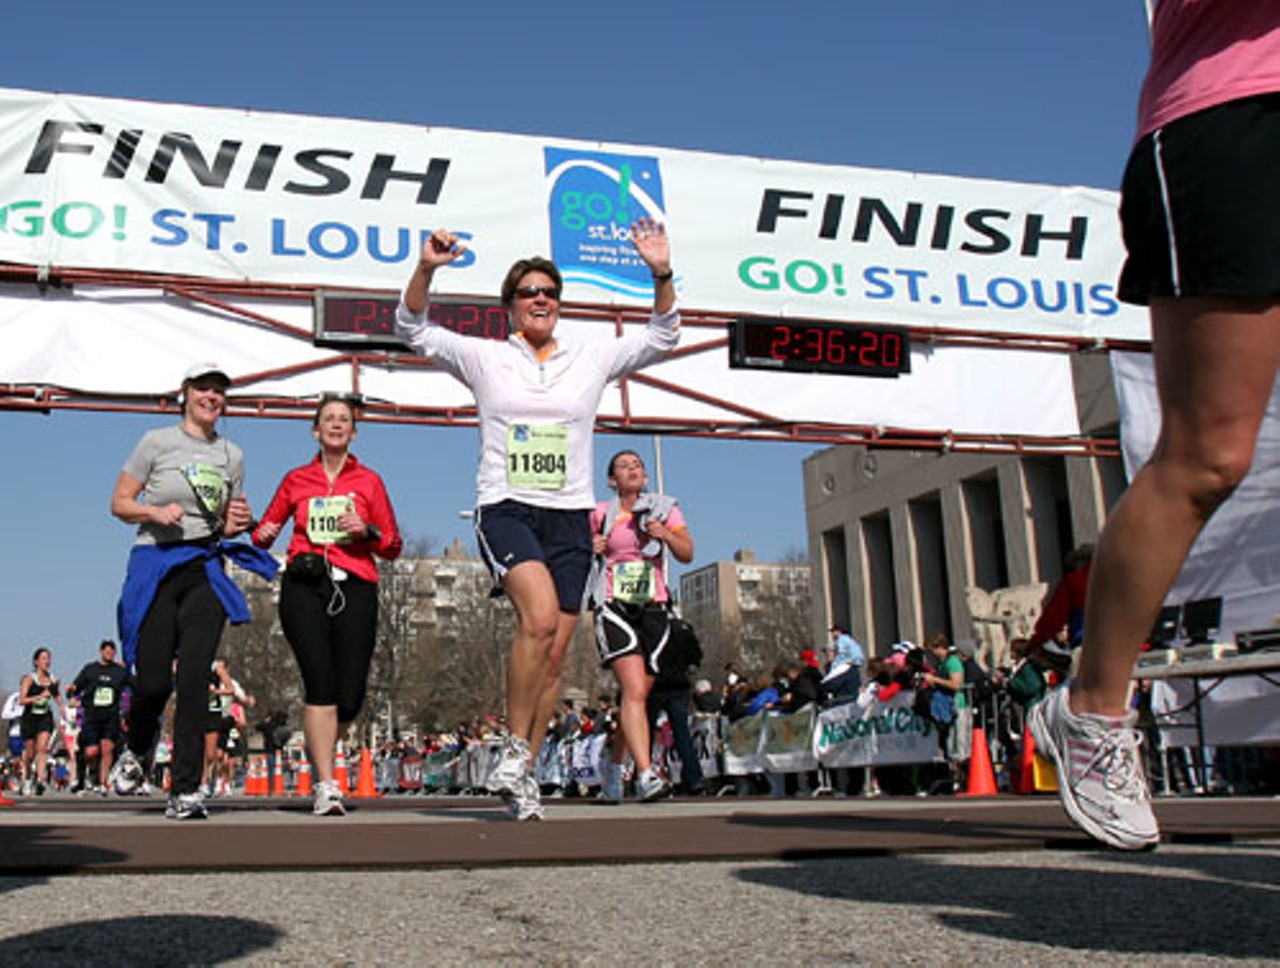 Deborah Siewing throws her hands up with joy for finishing the half marathon.